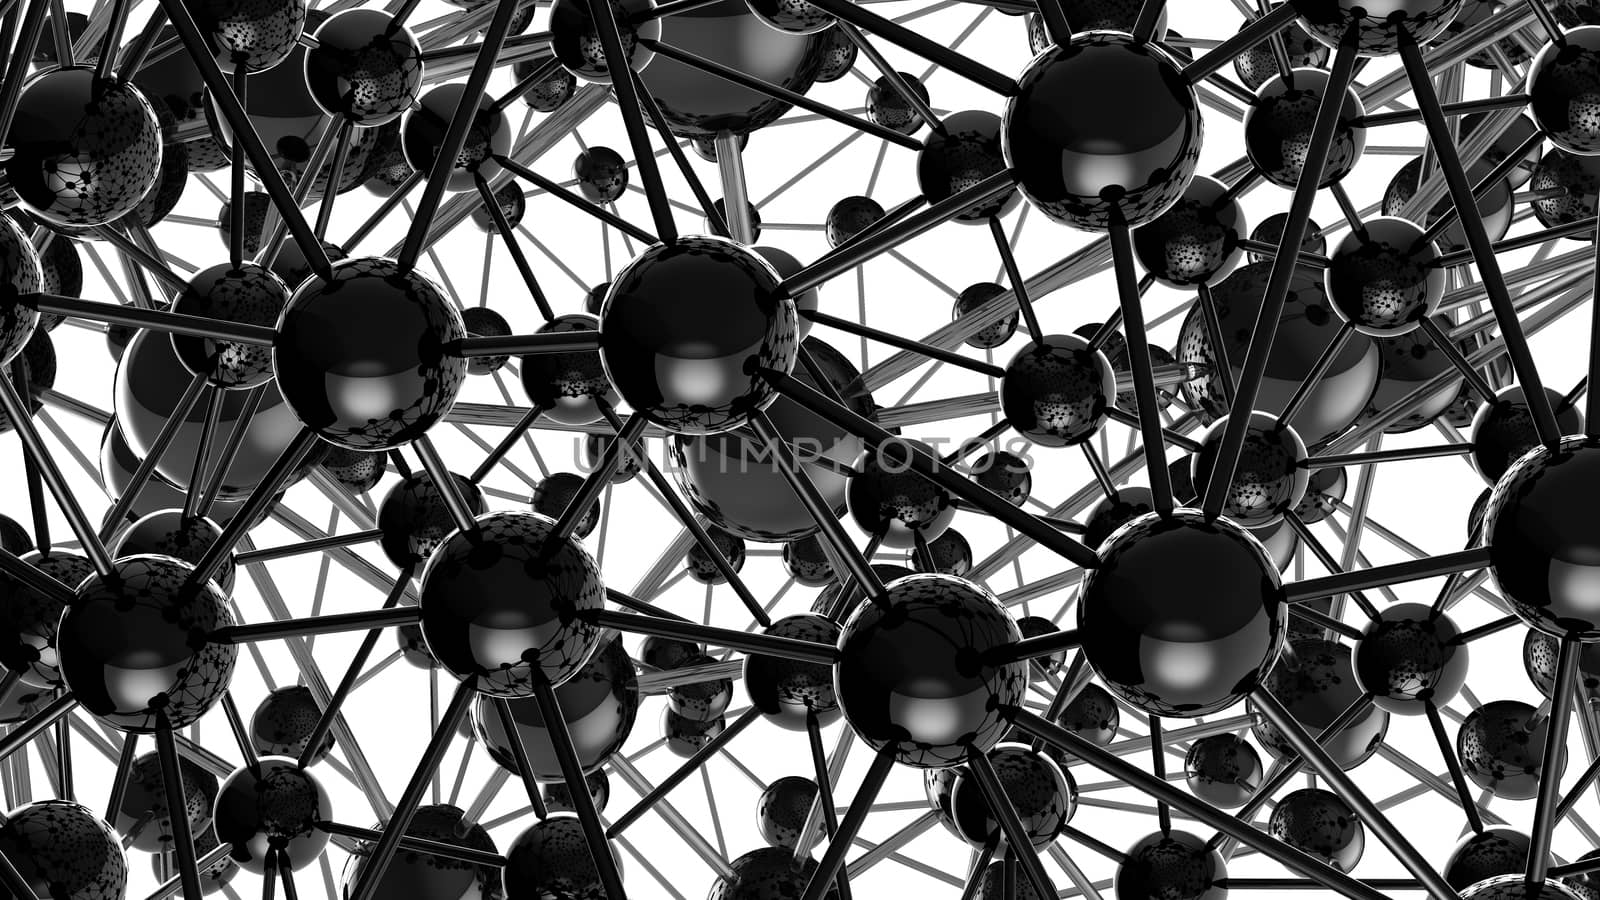 black Molecular geometric chaos abstract structure. Science technology network connection hi-tech background 3d rendering illustration.